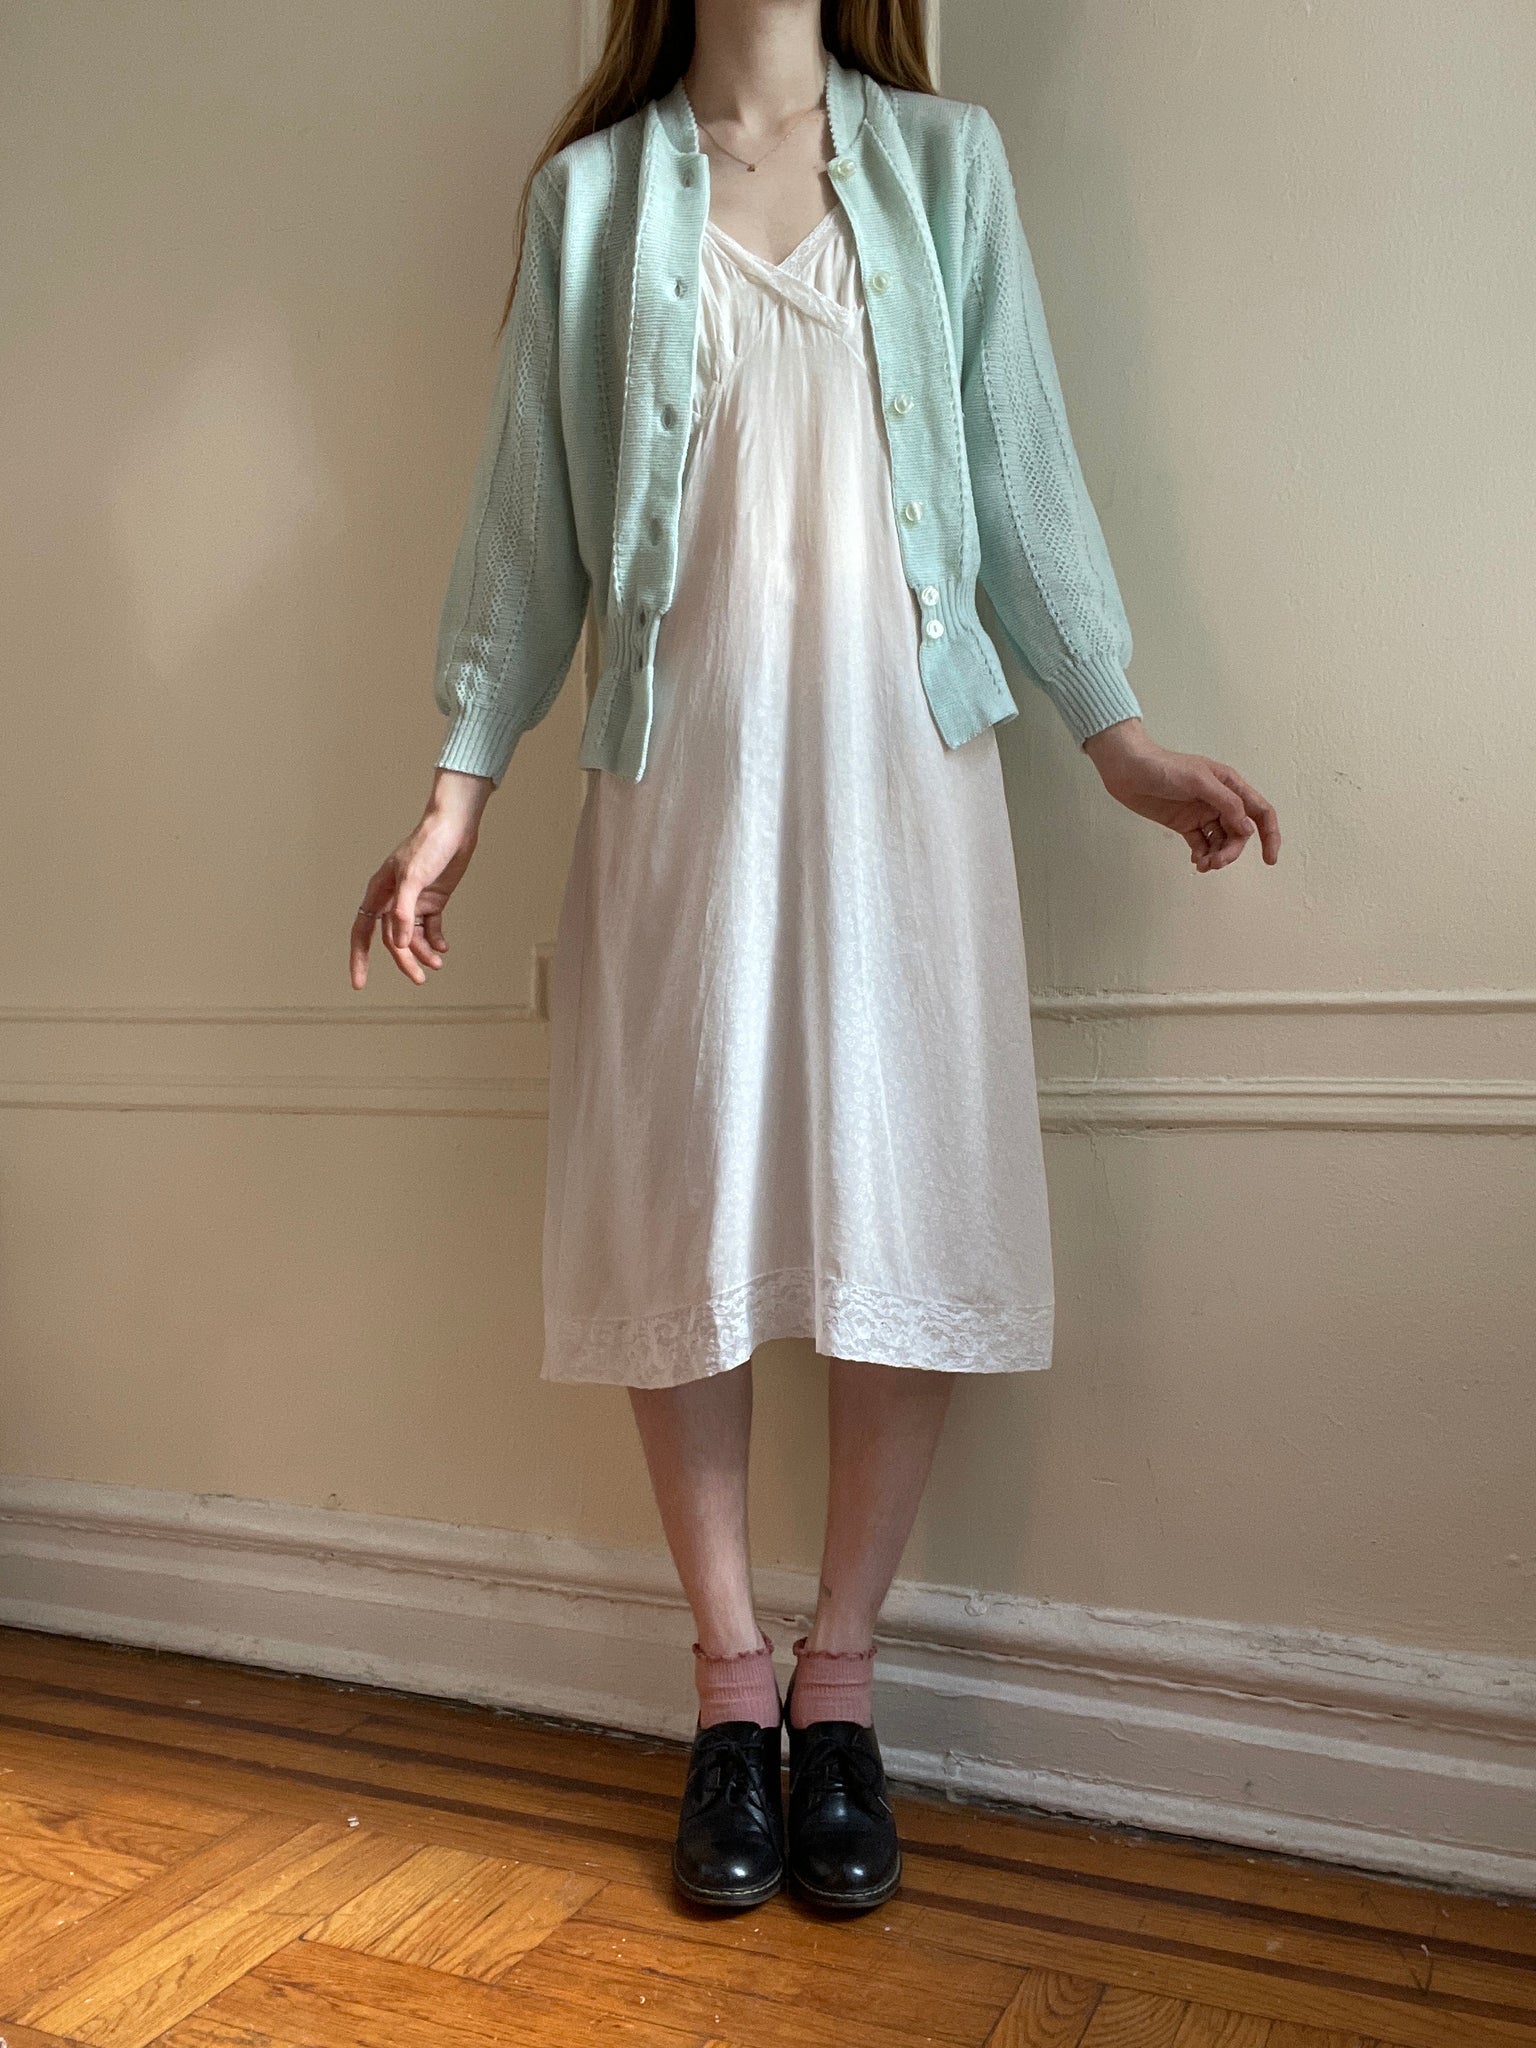 1980s Light Blue Knit Cardigan Balloon Sleeves Button Up